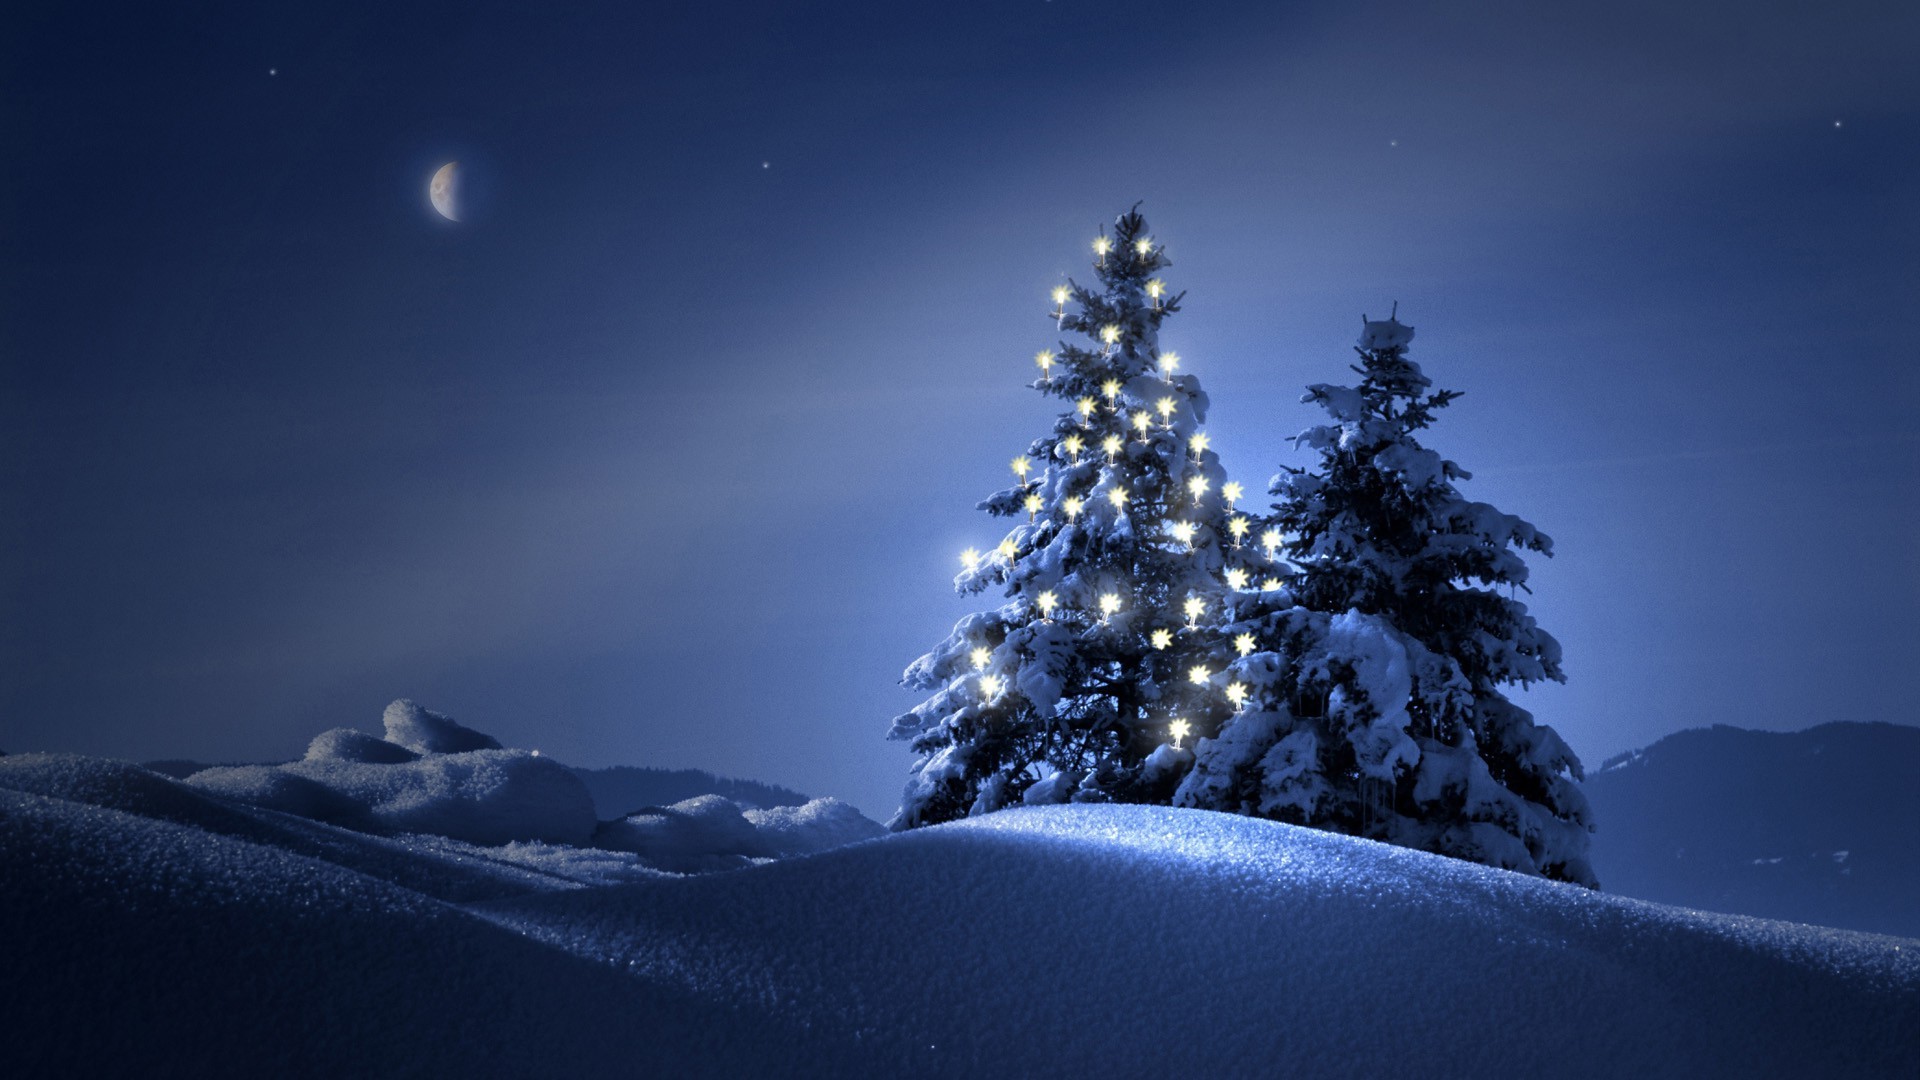 Snowy Christmas HD Wallpaper For Pc Amazing